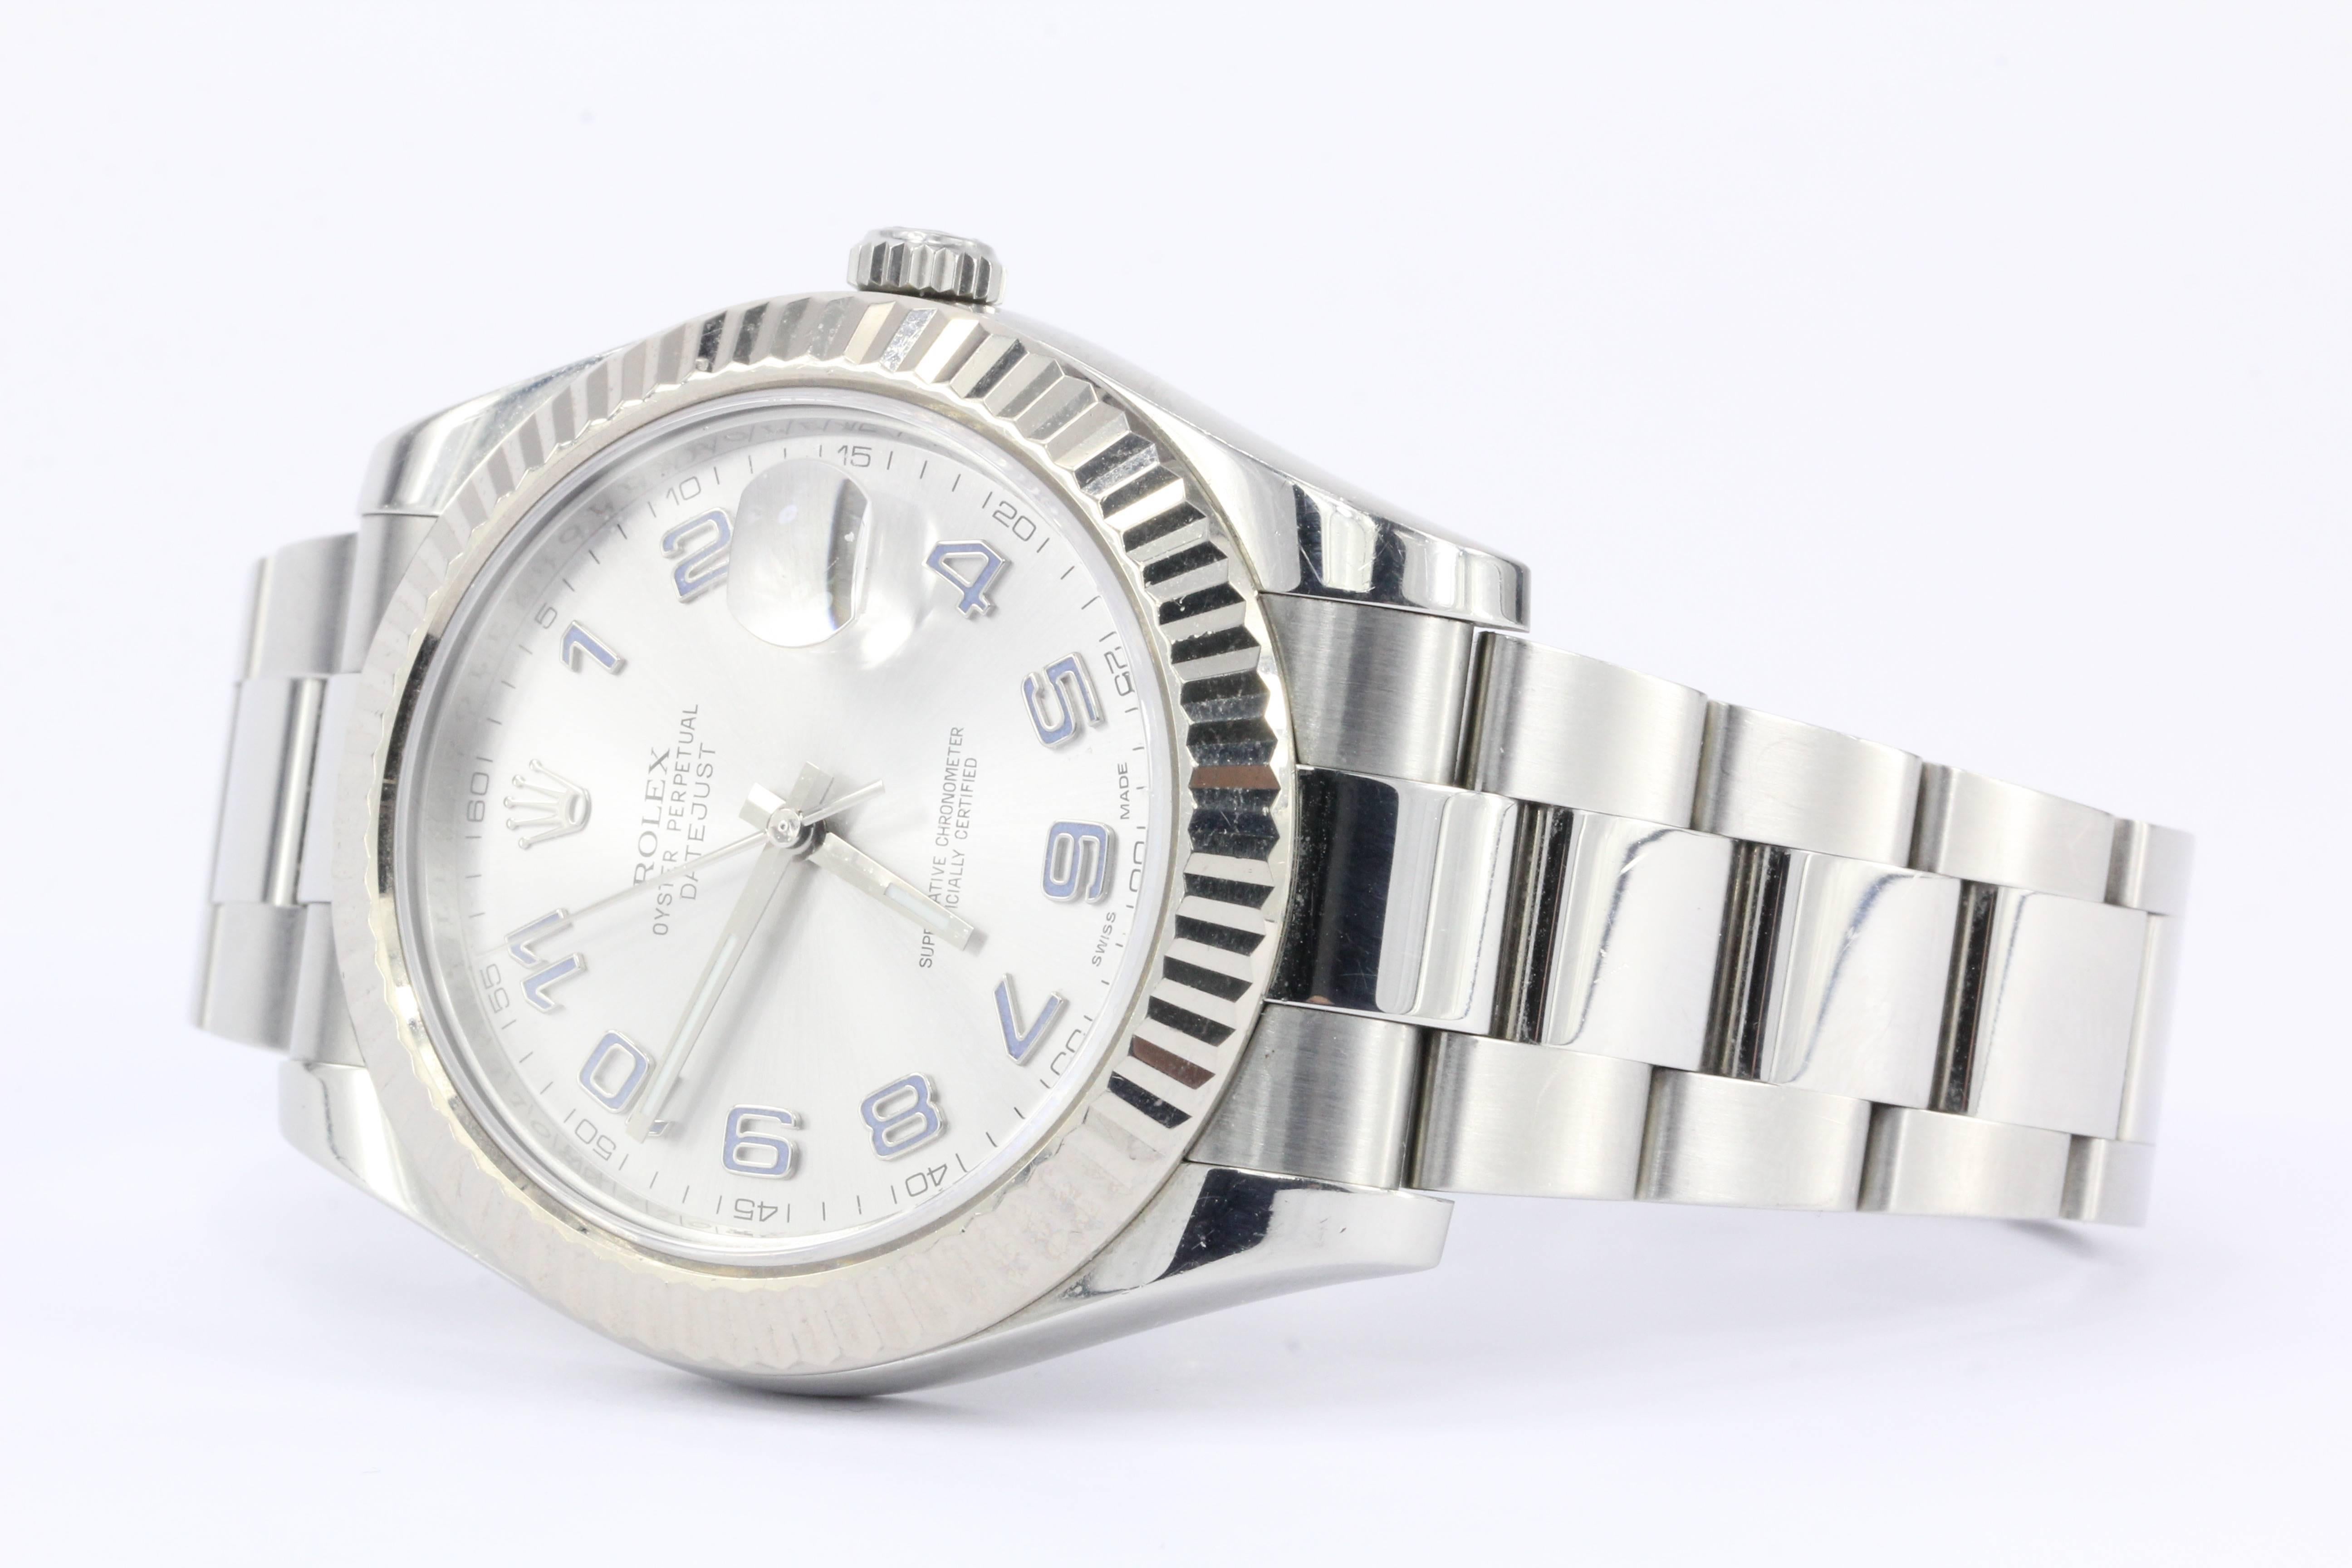 Rolex Datejust II 

Purchase in 2012

Reference: 116334

18k White Gold Fluted Bezel

Silver Arabic Dial

Steel Oyster Bracelet

41mm Case Size

Comes with original Paperwork 

Fresh Service

